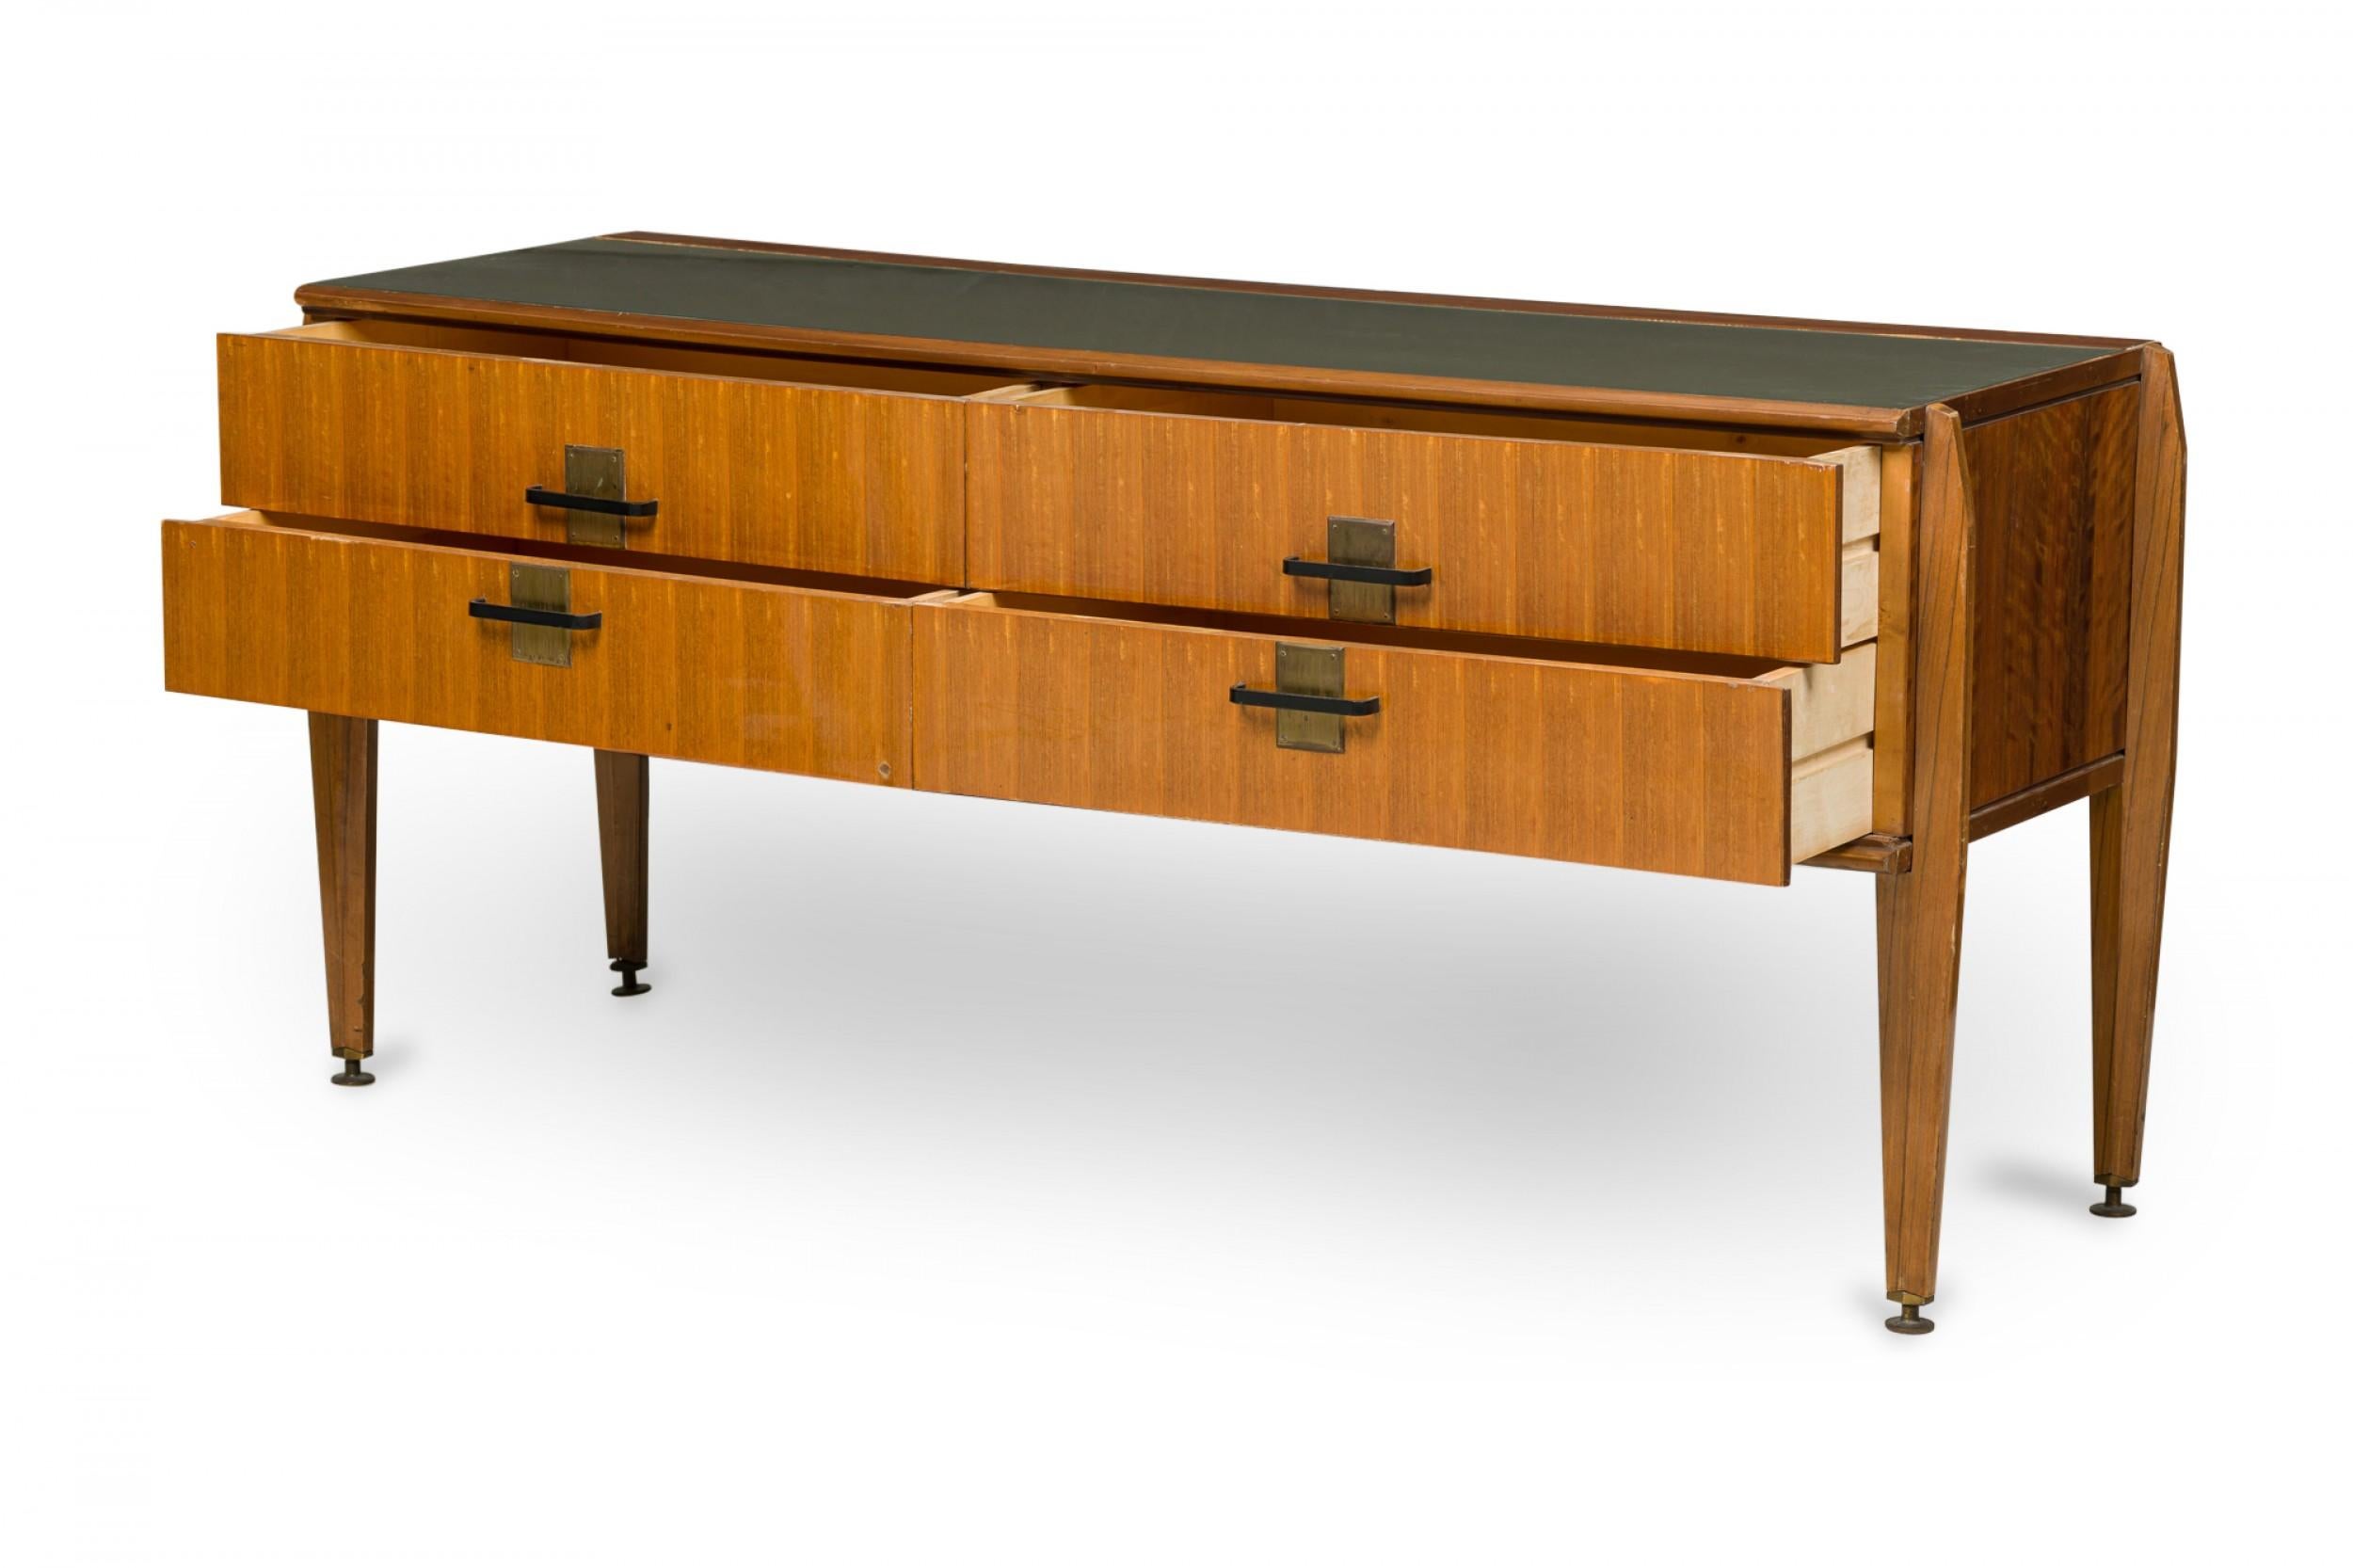 Italian Mid-Century Modern 4-drawer chest with a lightly vertically striped fruitwood veneer, with bronze and ebonized drawer pulls and a muted green glass top, resting on four tapered square legs ending in adjustable metal feet. (VITTORIO DASSI)